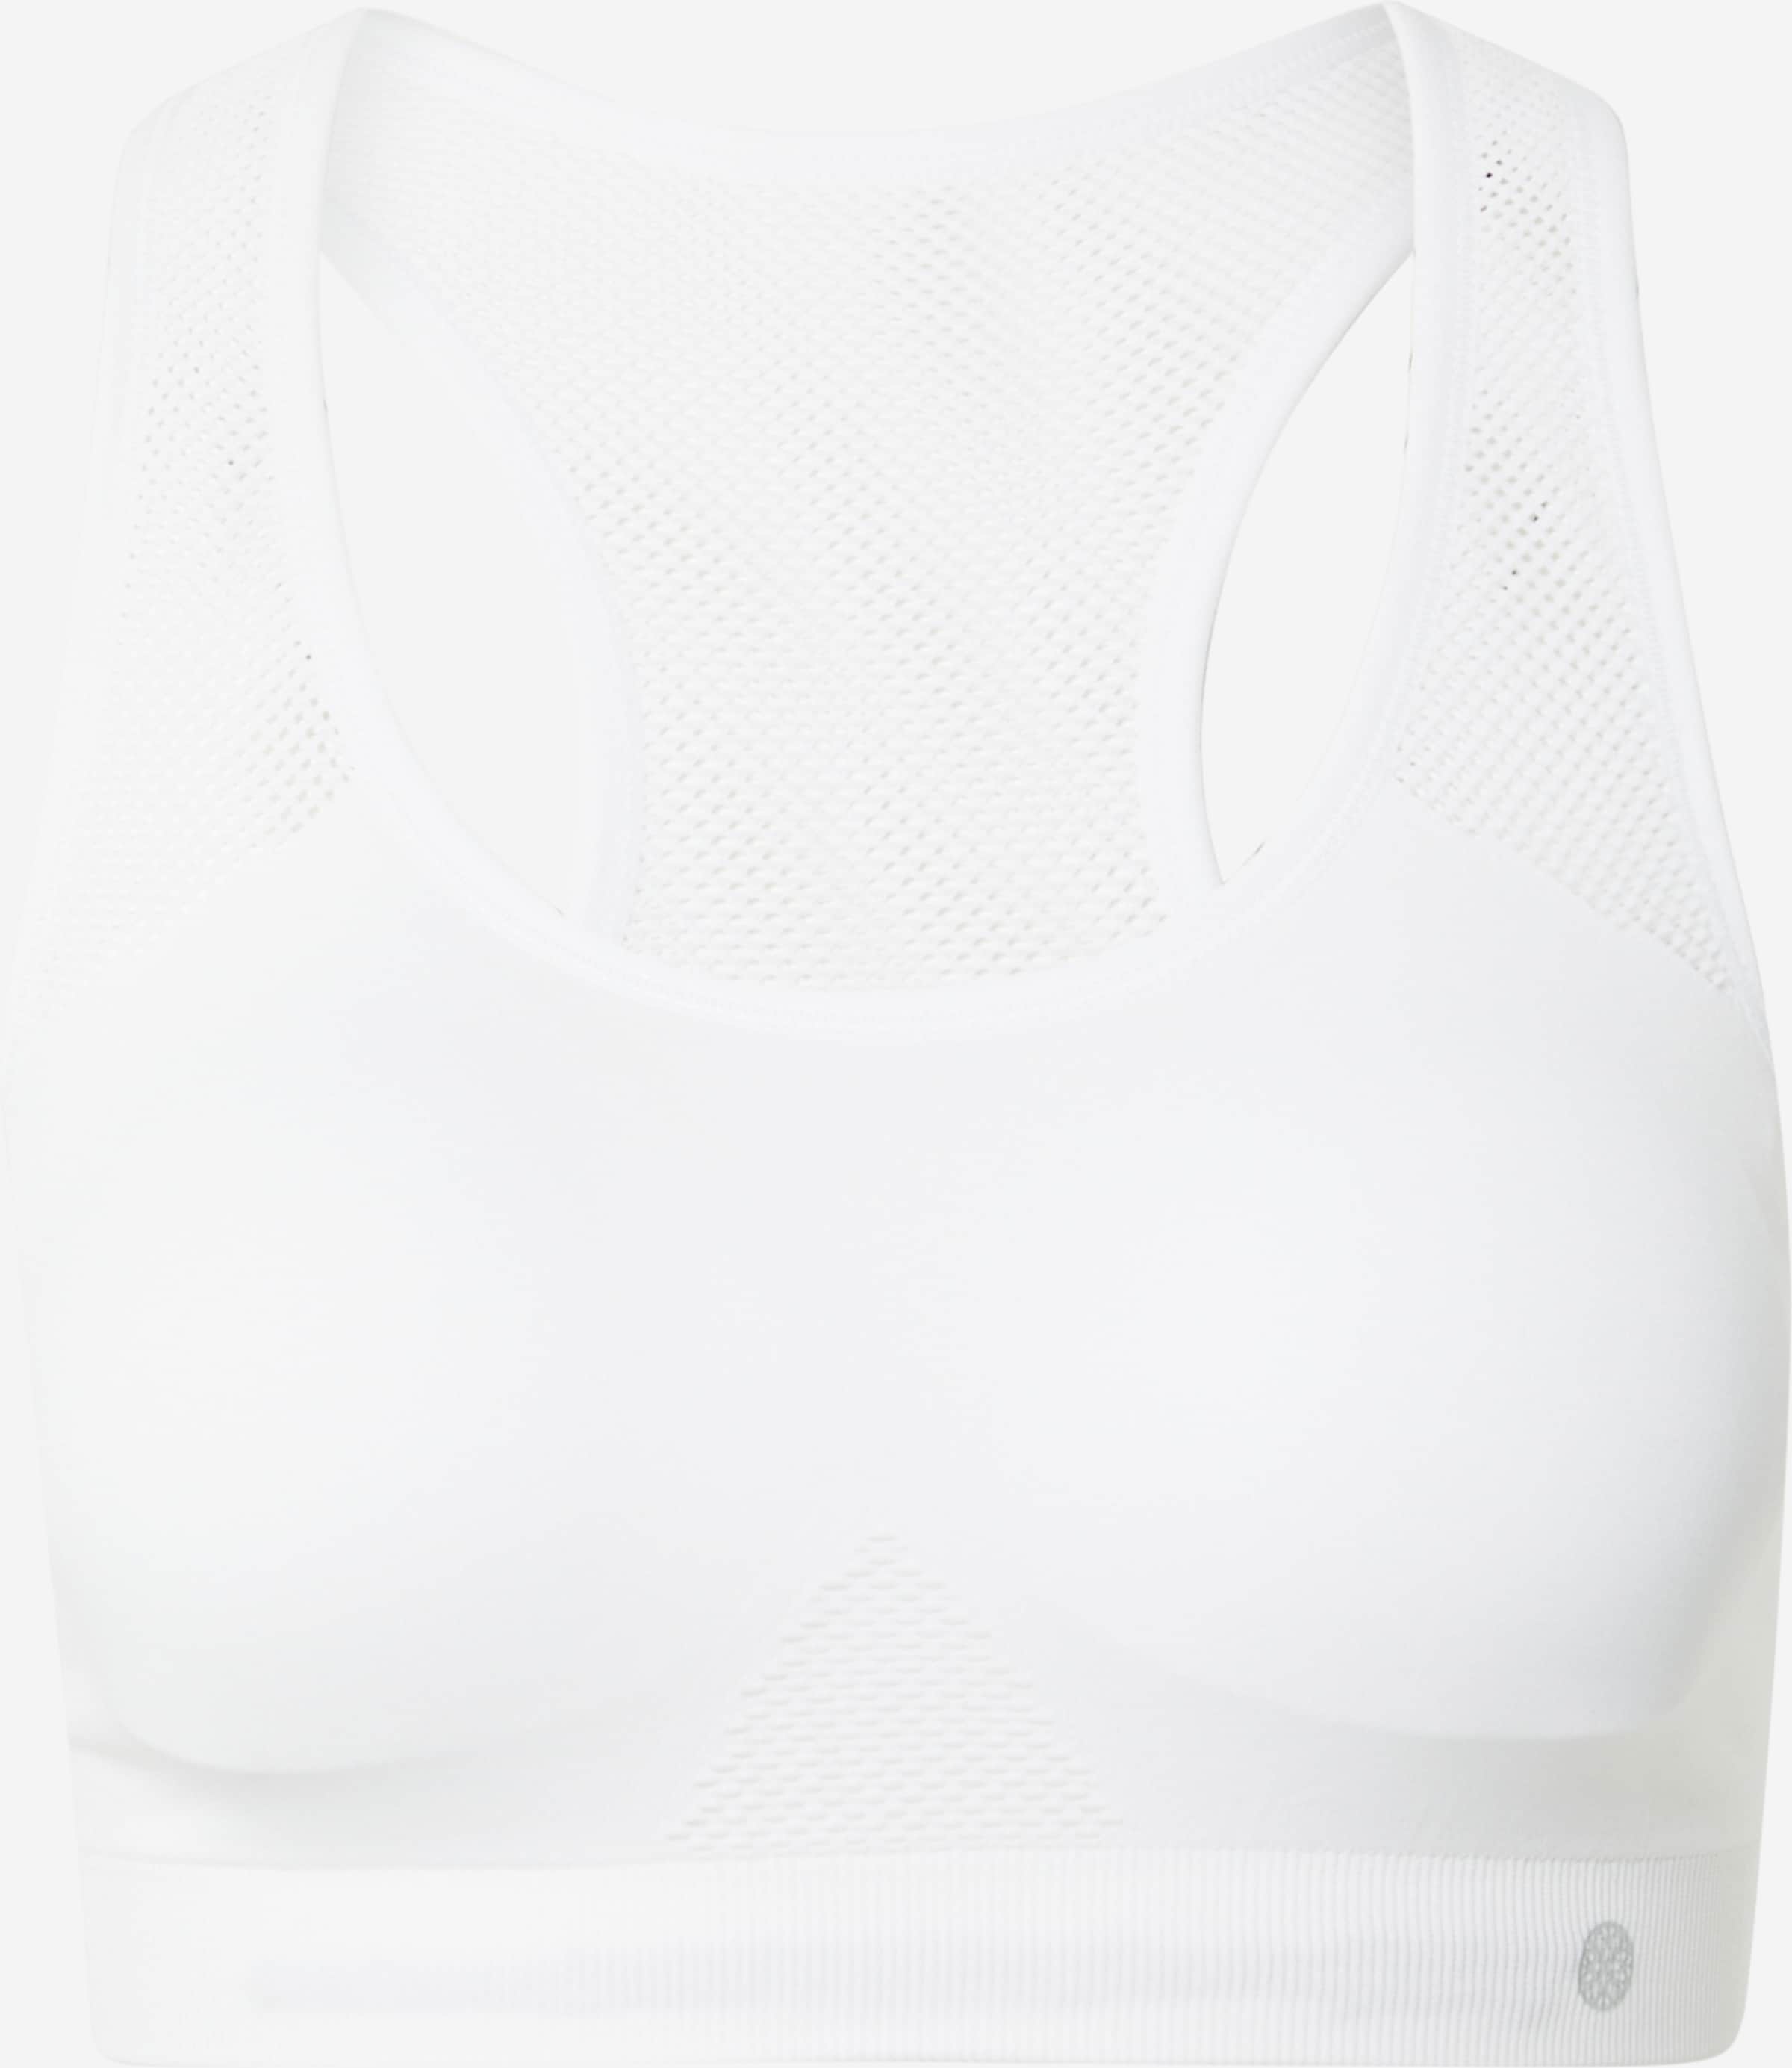 Athlecia Bustier Sport-BH \'Rosemary\' in Weiß | ABOUT YOU